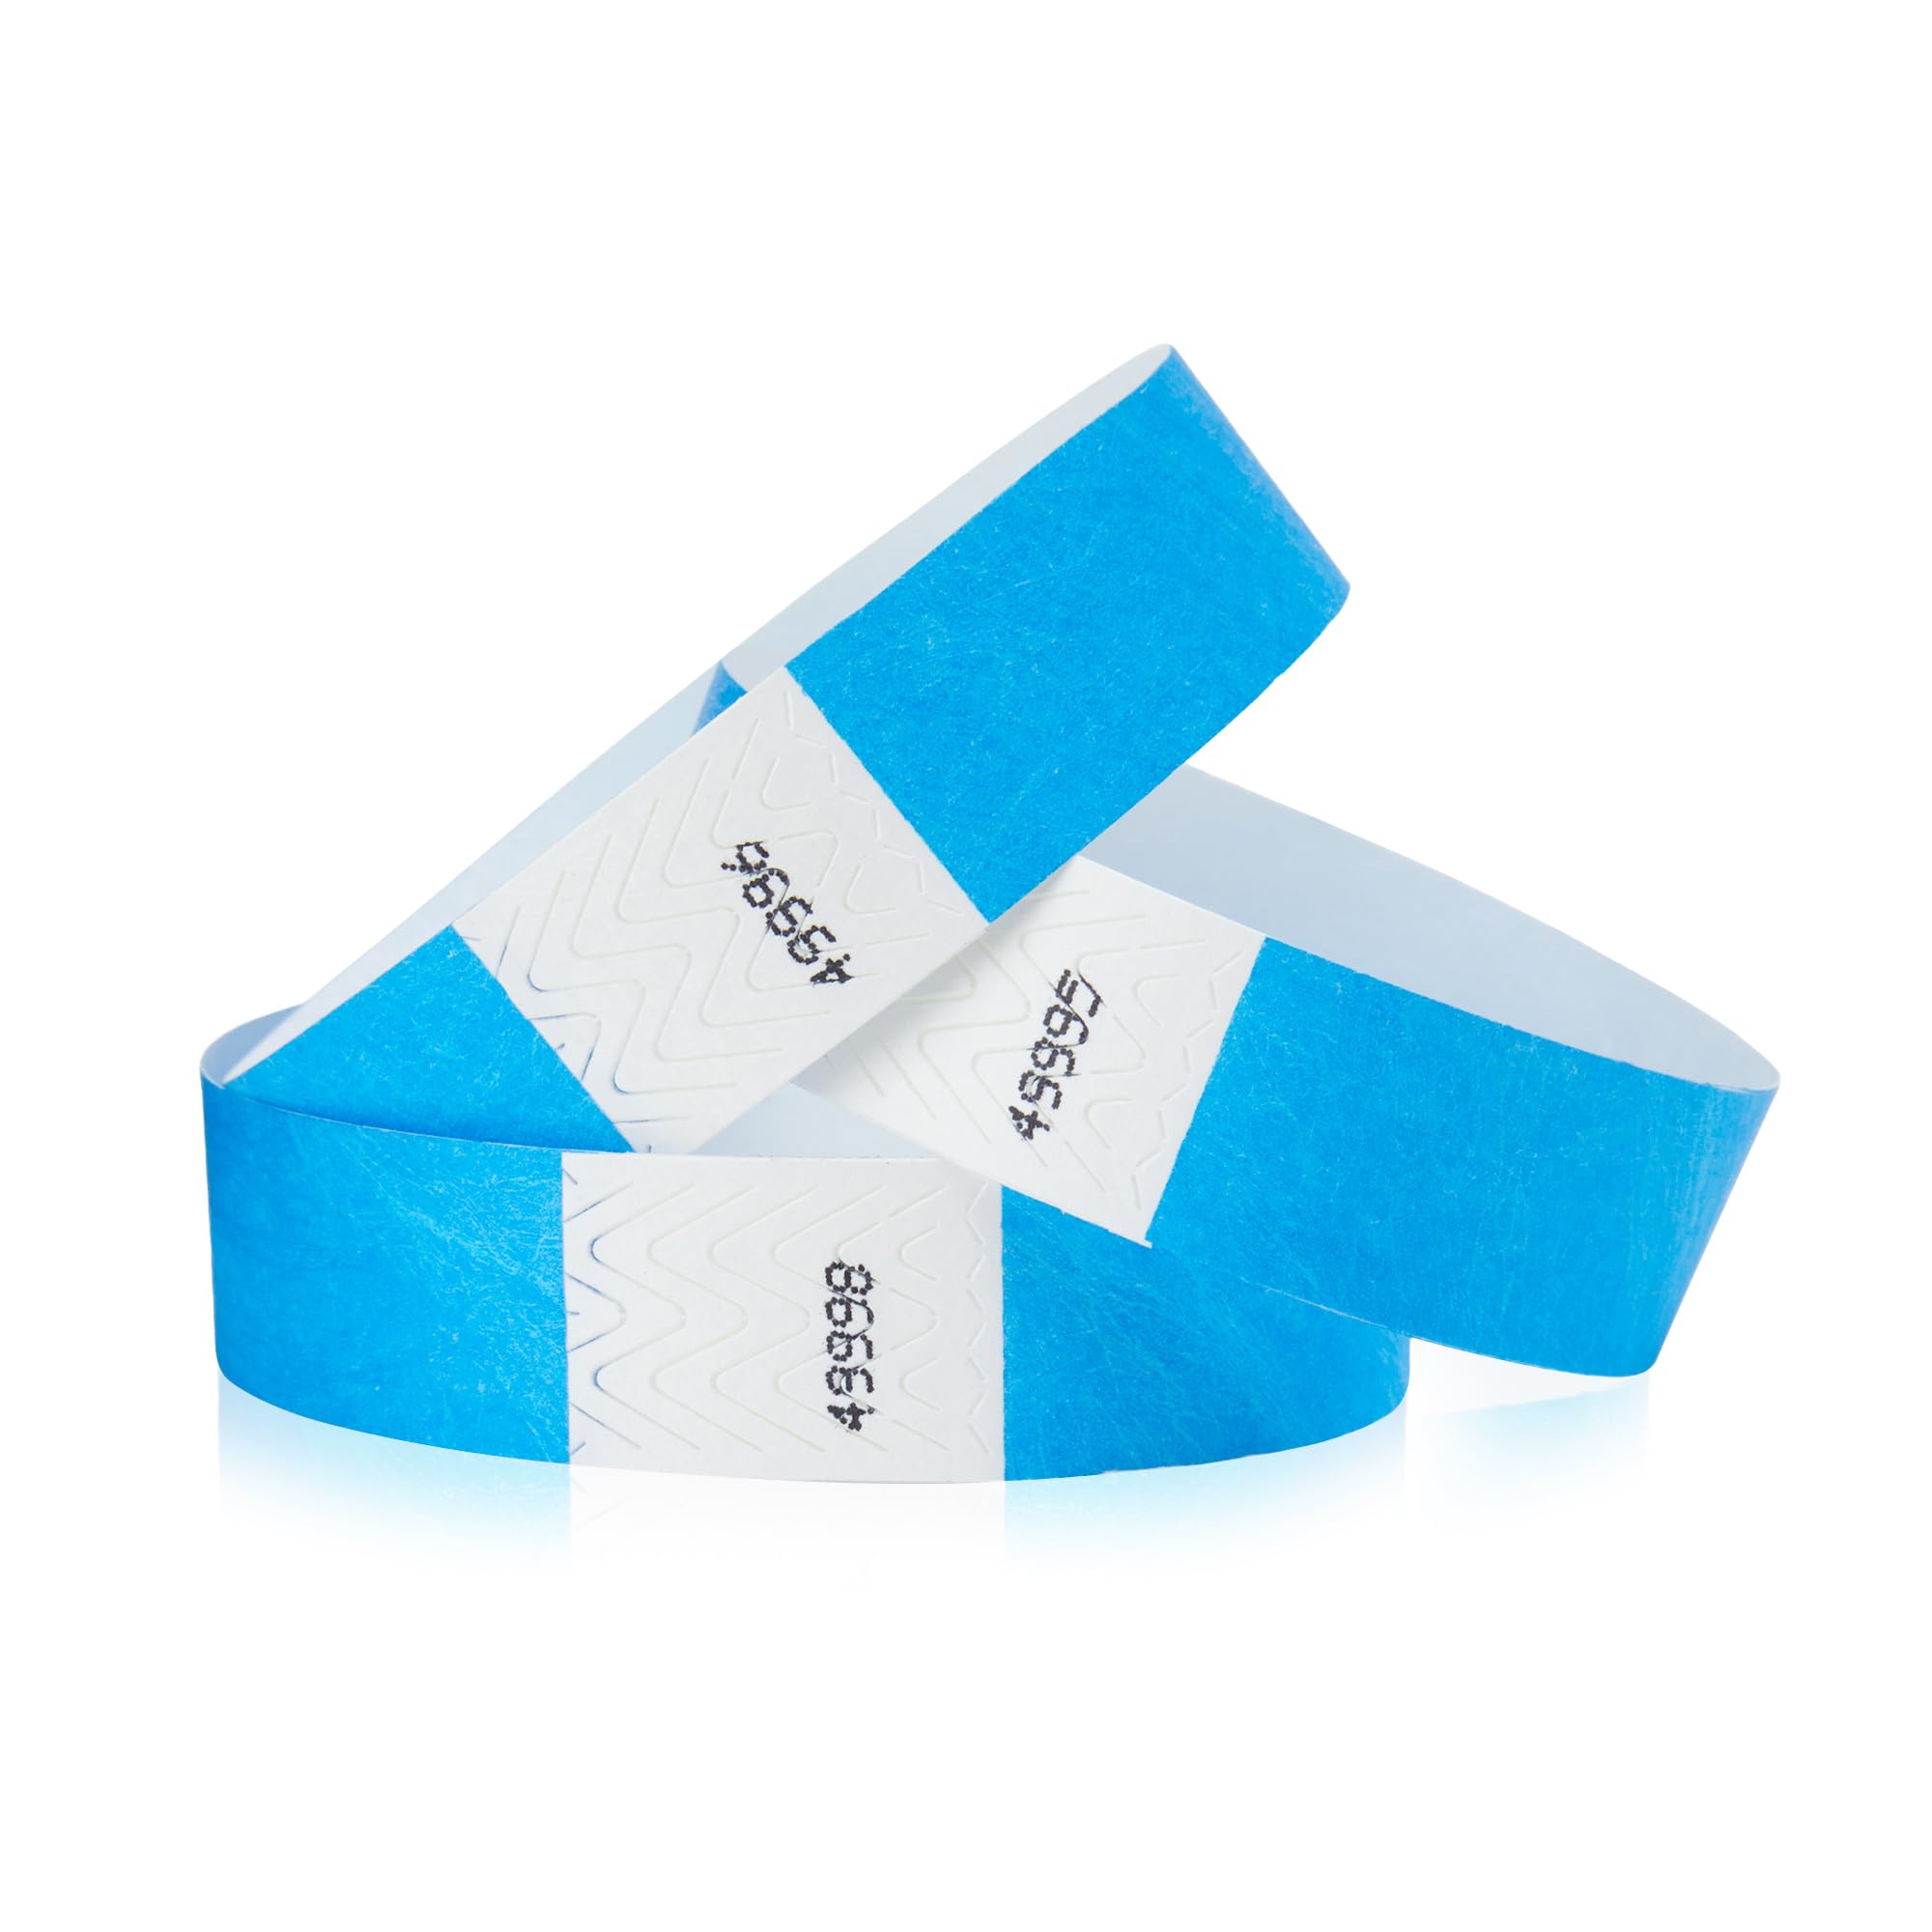 WristCo Neon Blue Tyvek Wristbands for Events – 500 Count – Tamper-Proof Design & Fluorescent Color Prevent Reuse – Premium-Grade Bracelets for Hospital & Medical ID, Party & VIP Identification